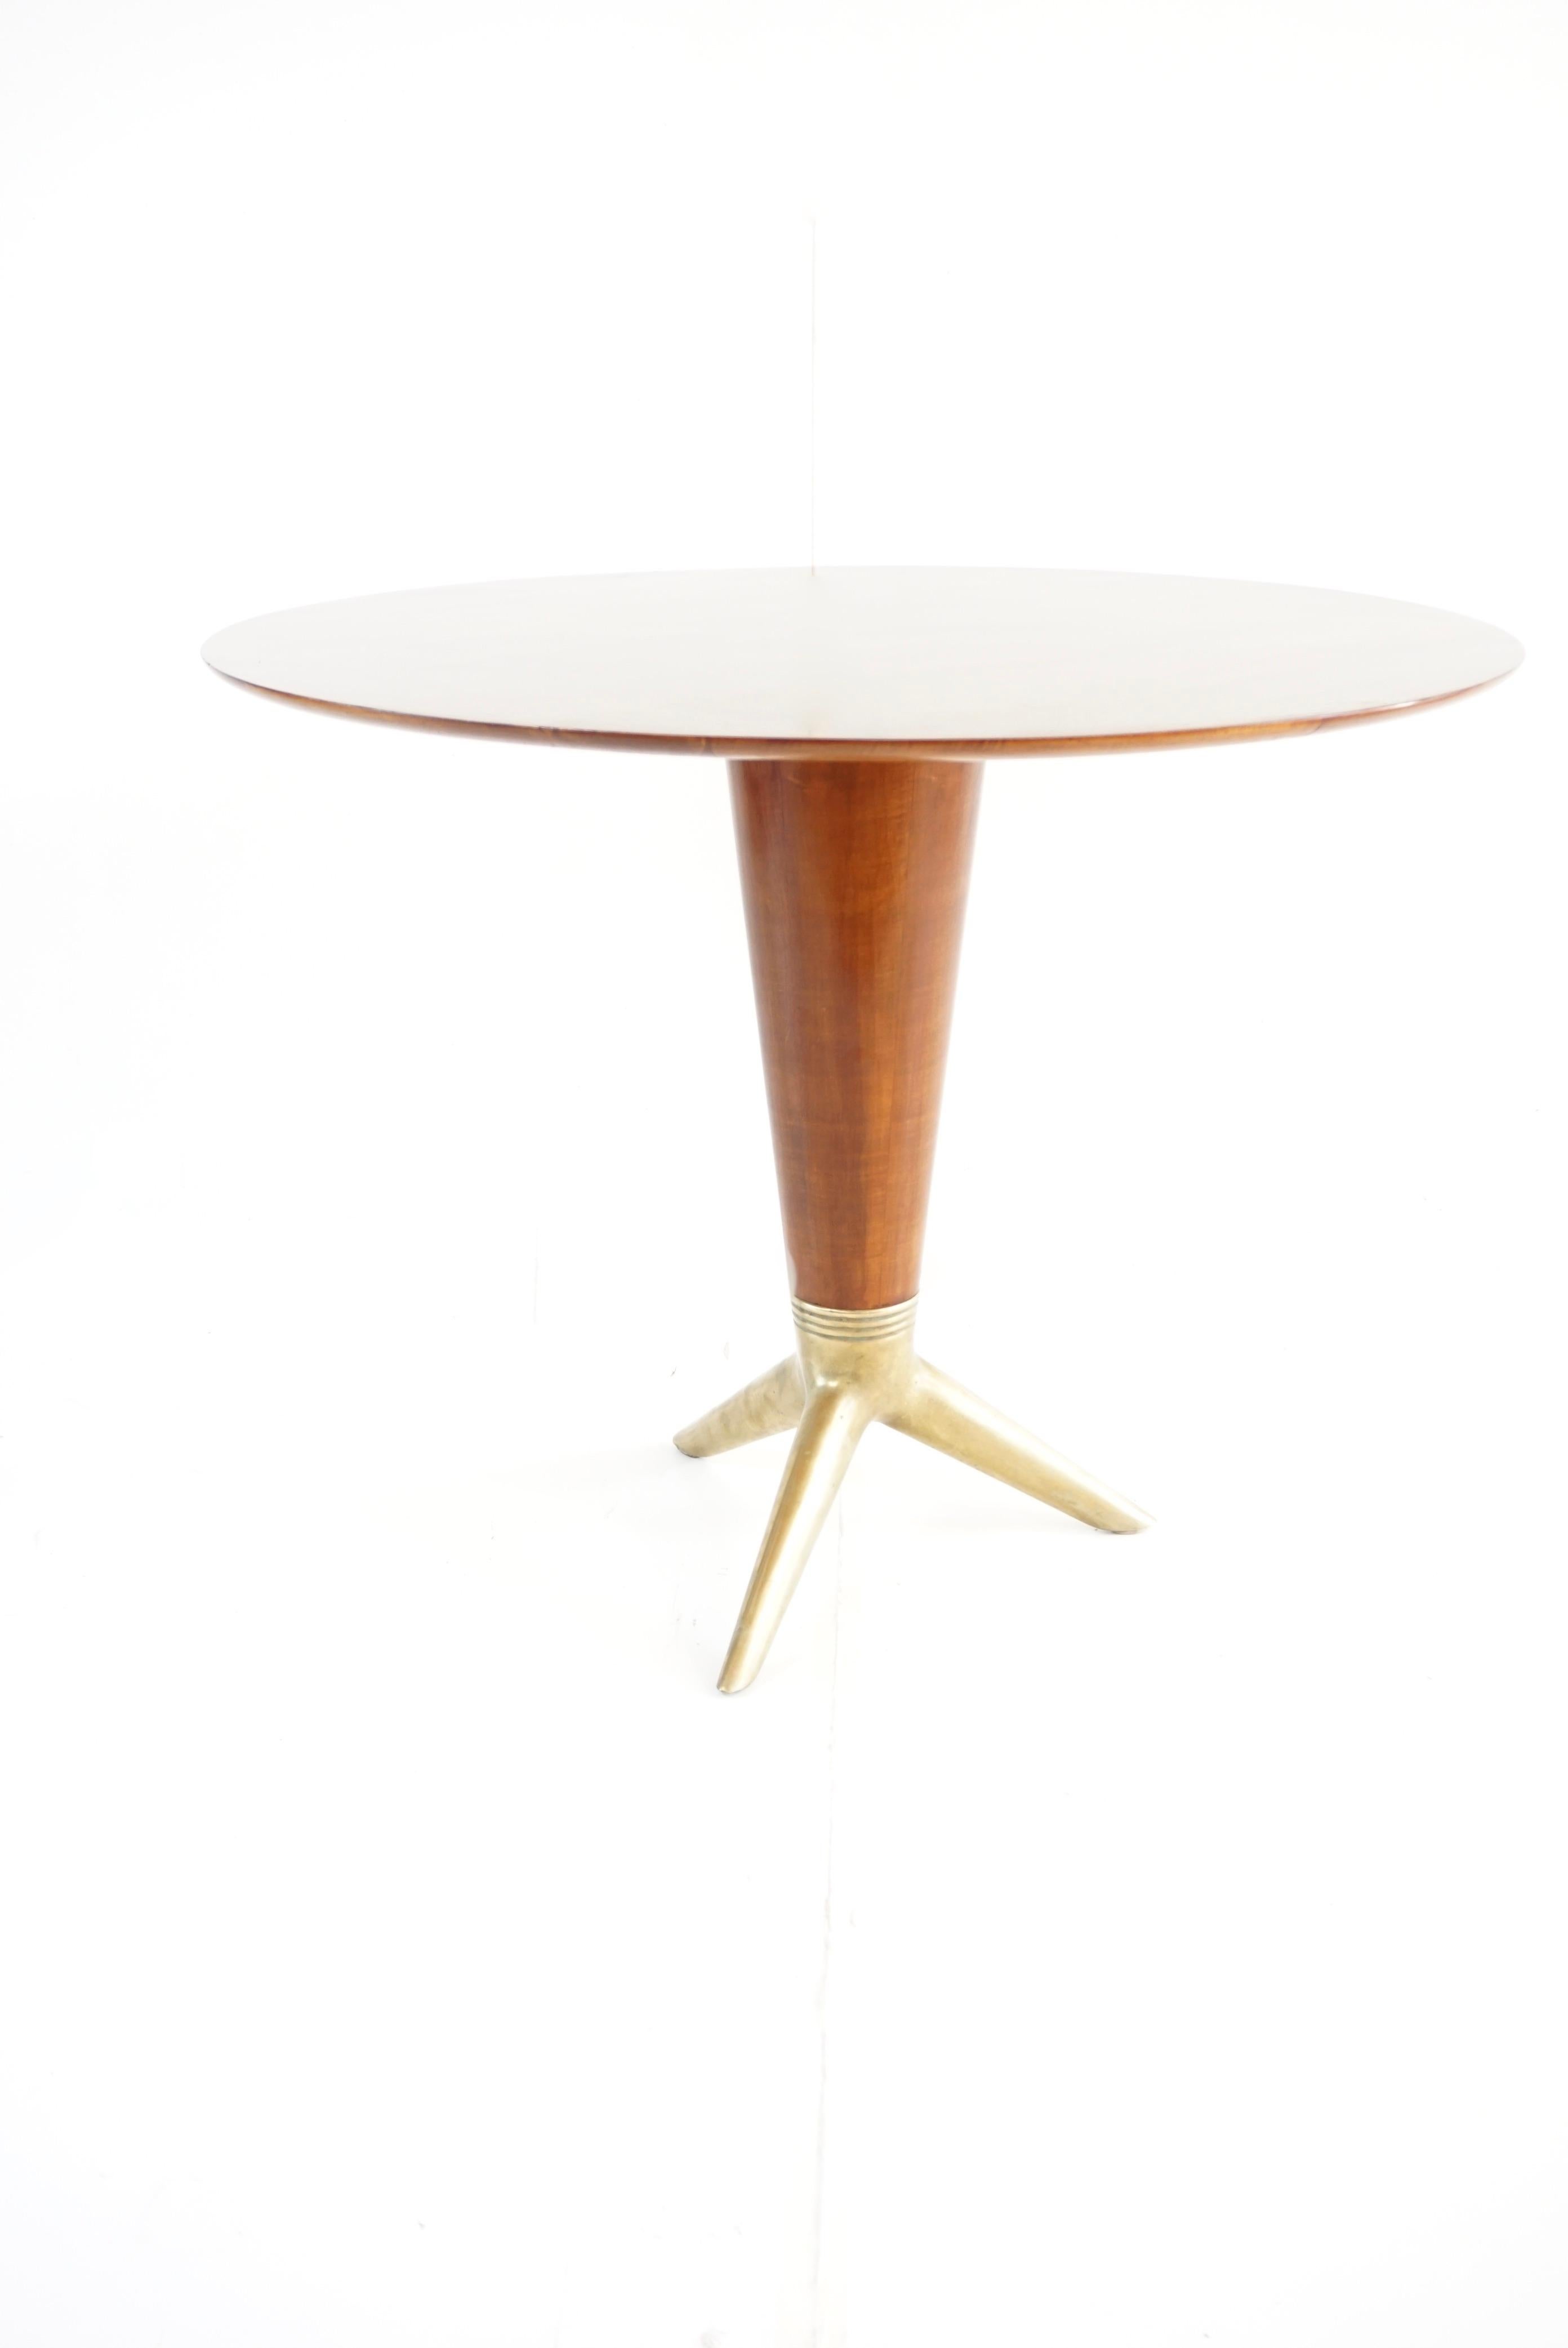 Mid-20th Century Rare Maple and Brass Round Center Table by I.S.A. Bergamo 1950 For Sale